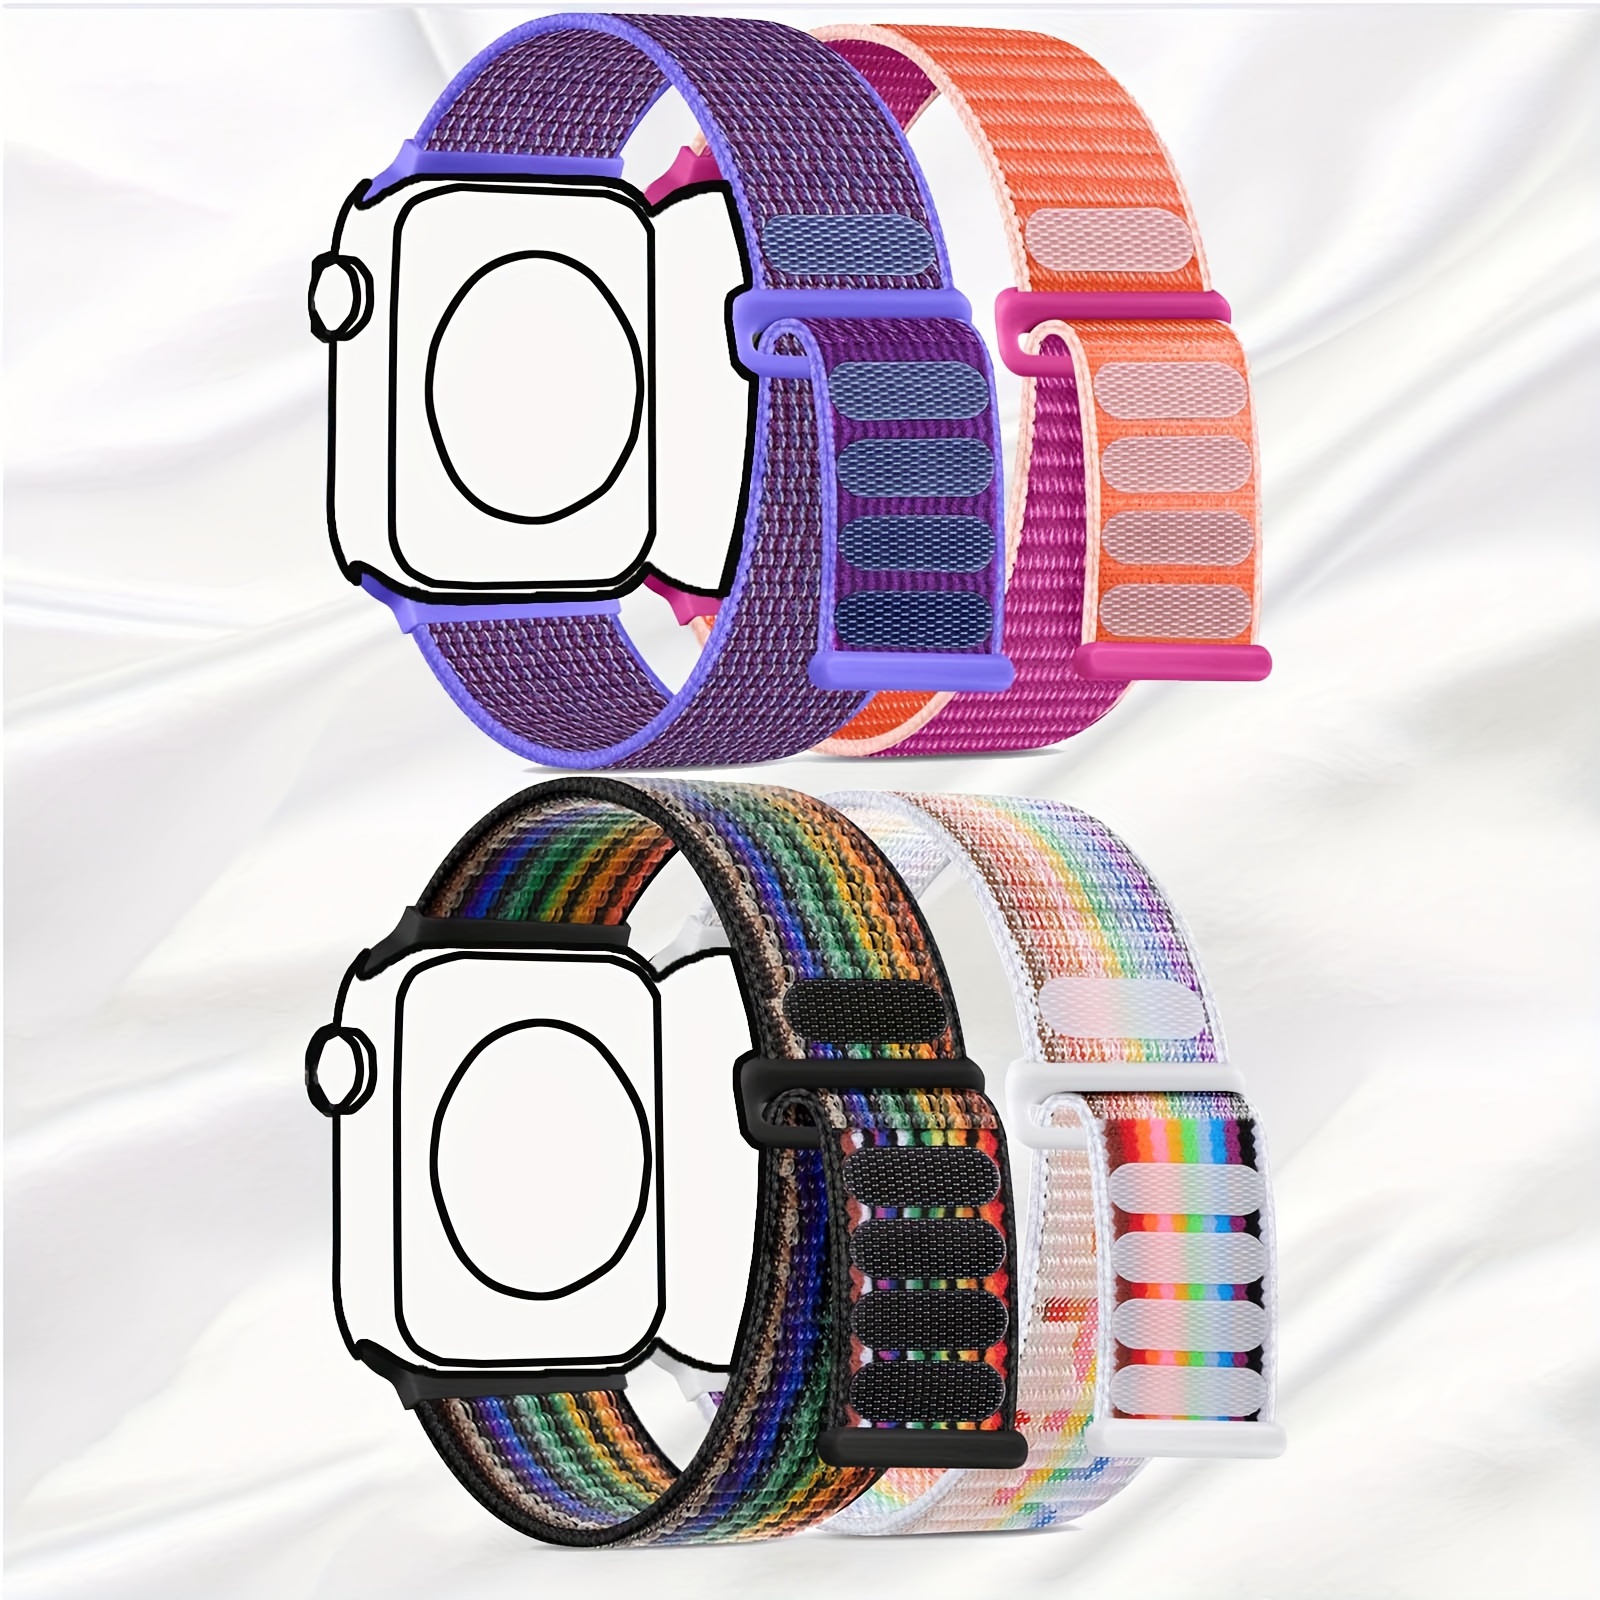 

2-piece Adjustable Nylon Solo Loop Bands For Watch 38mm-49mm - Stretchy, Braided Sport Straps With Magic Tape Closure - Compatible With Iwatch Ultra/se/series 1-9